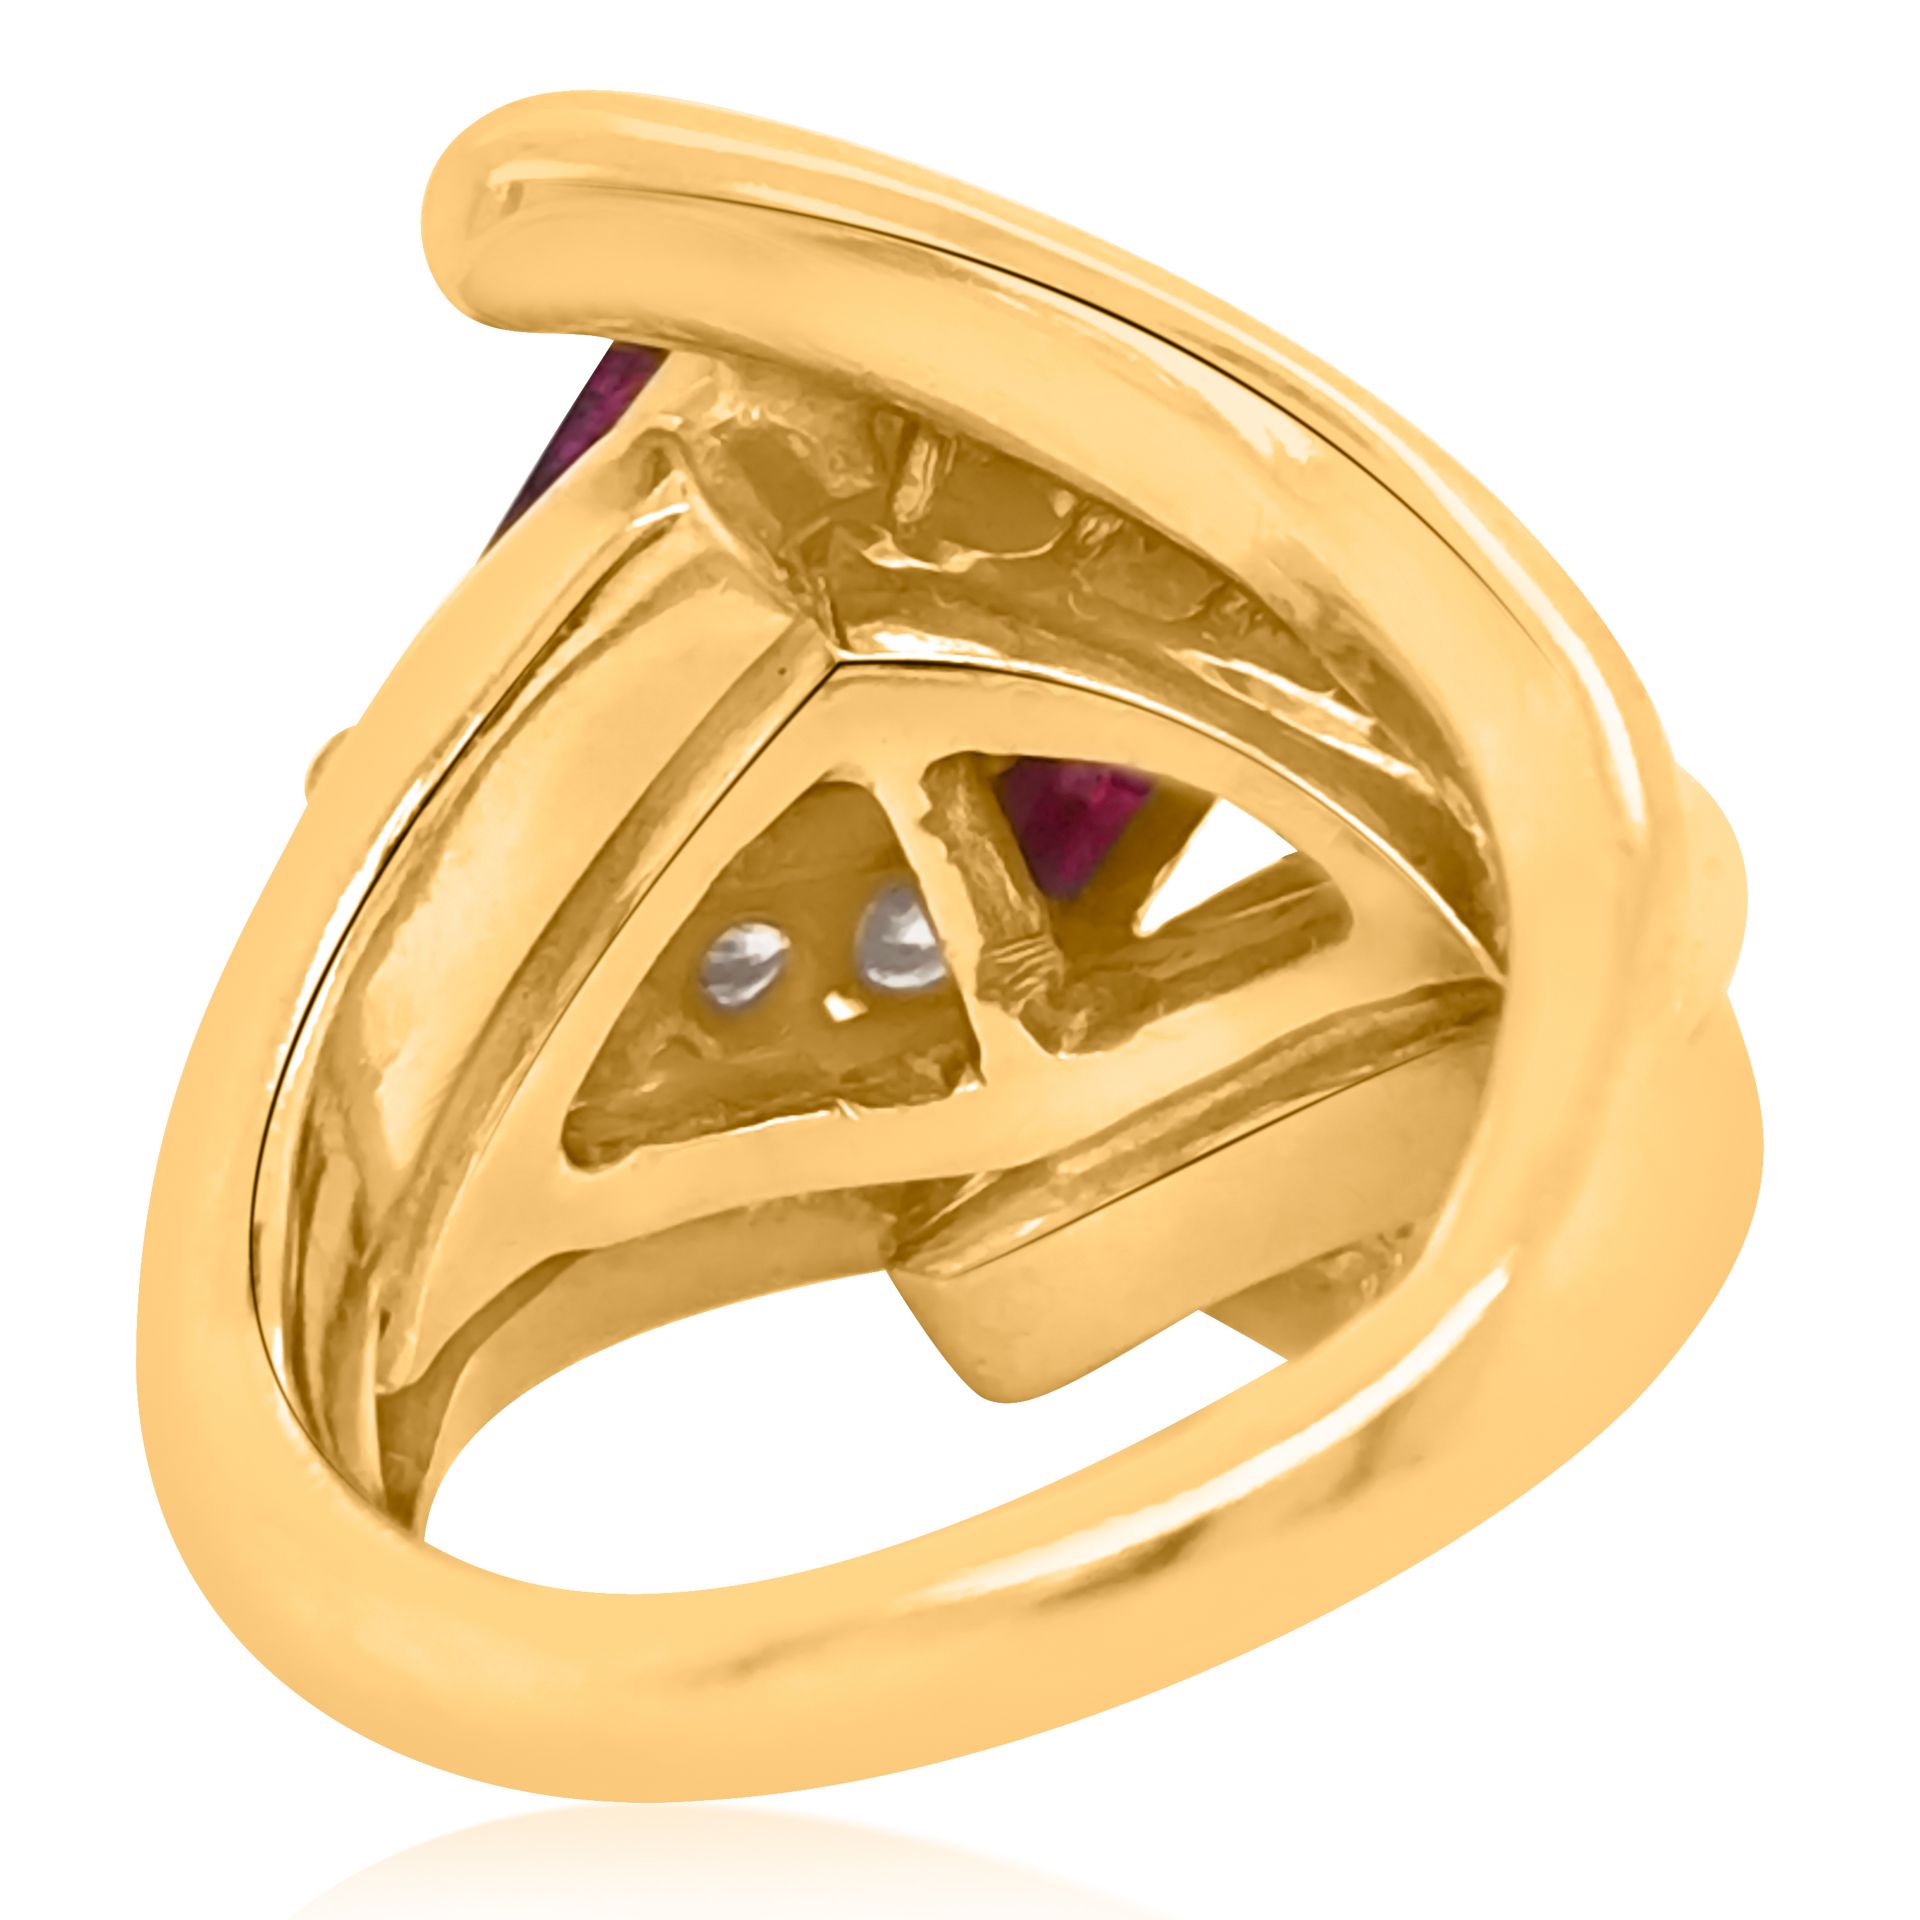 18K GOLD RING WITH RUBY AND DIAMONDS - Image 3 of 5